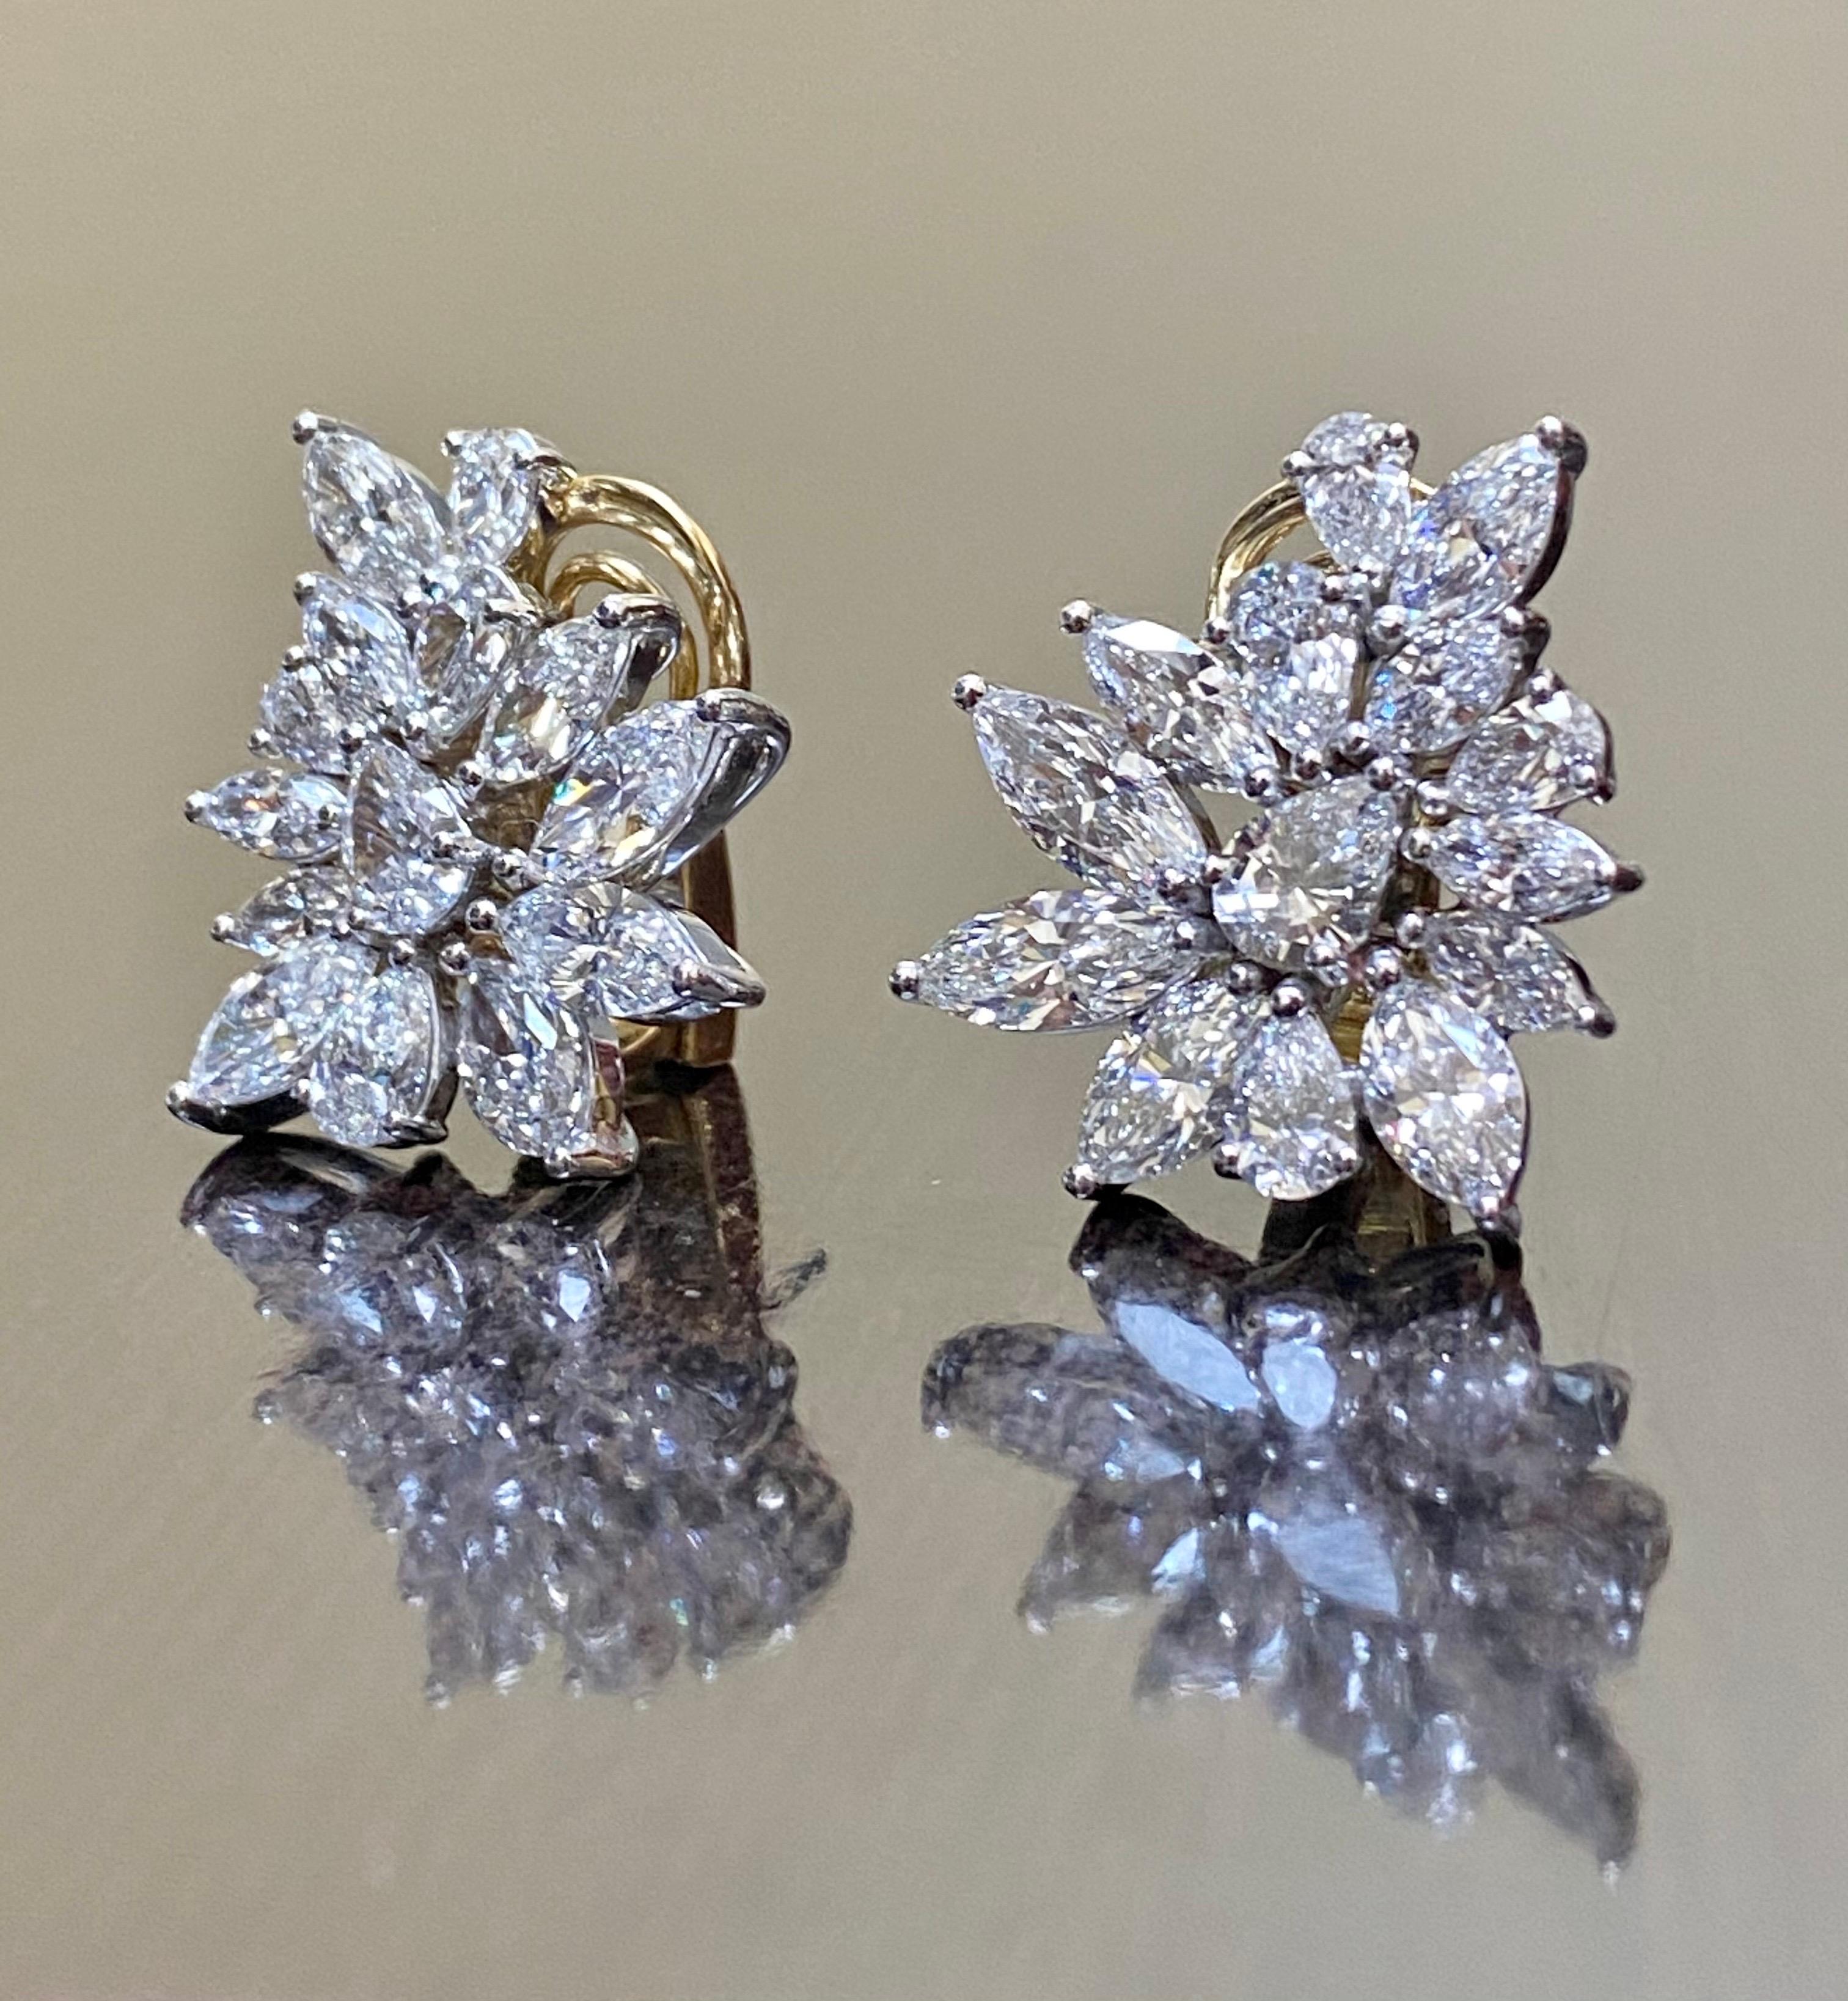 Handmade 18K White Gold 9 Carat Marquise and Pear Shape Diamond Earrings For Sale 2